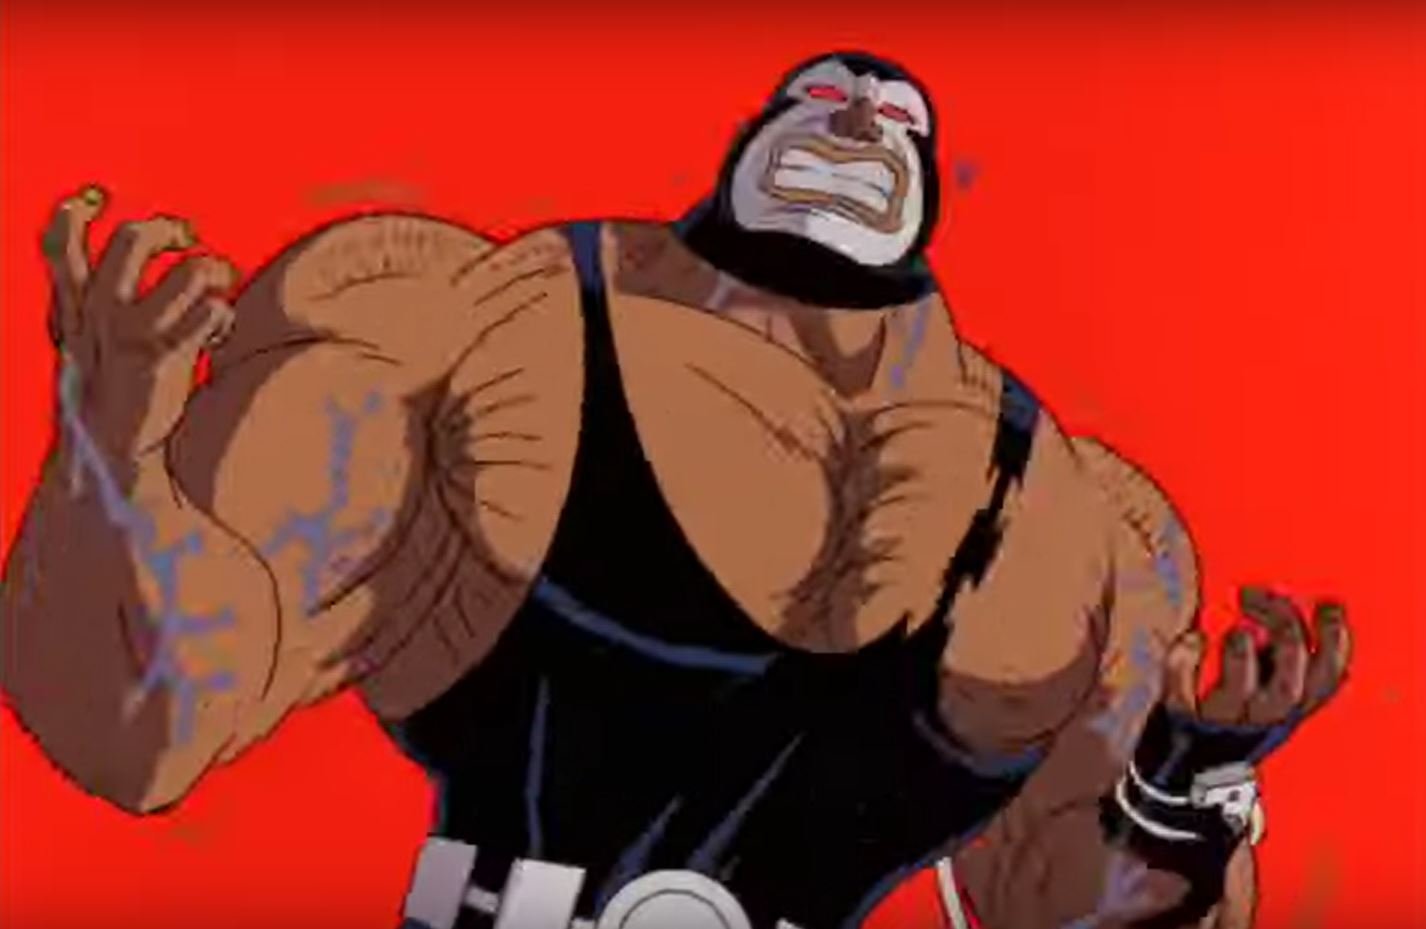 Bane Toon Porn - Growing giant/muscle growth: Painful Baneâ€¦ ThisVid.com